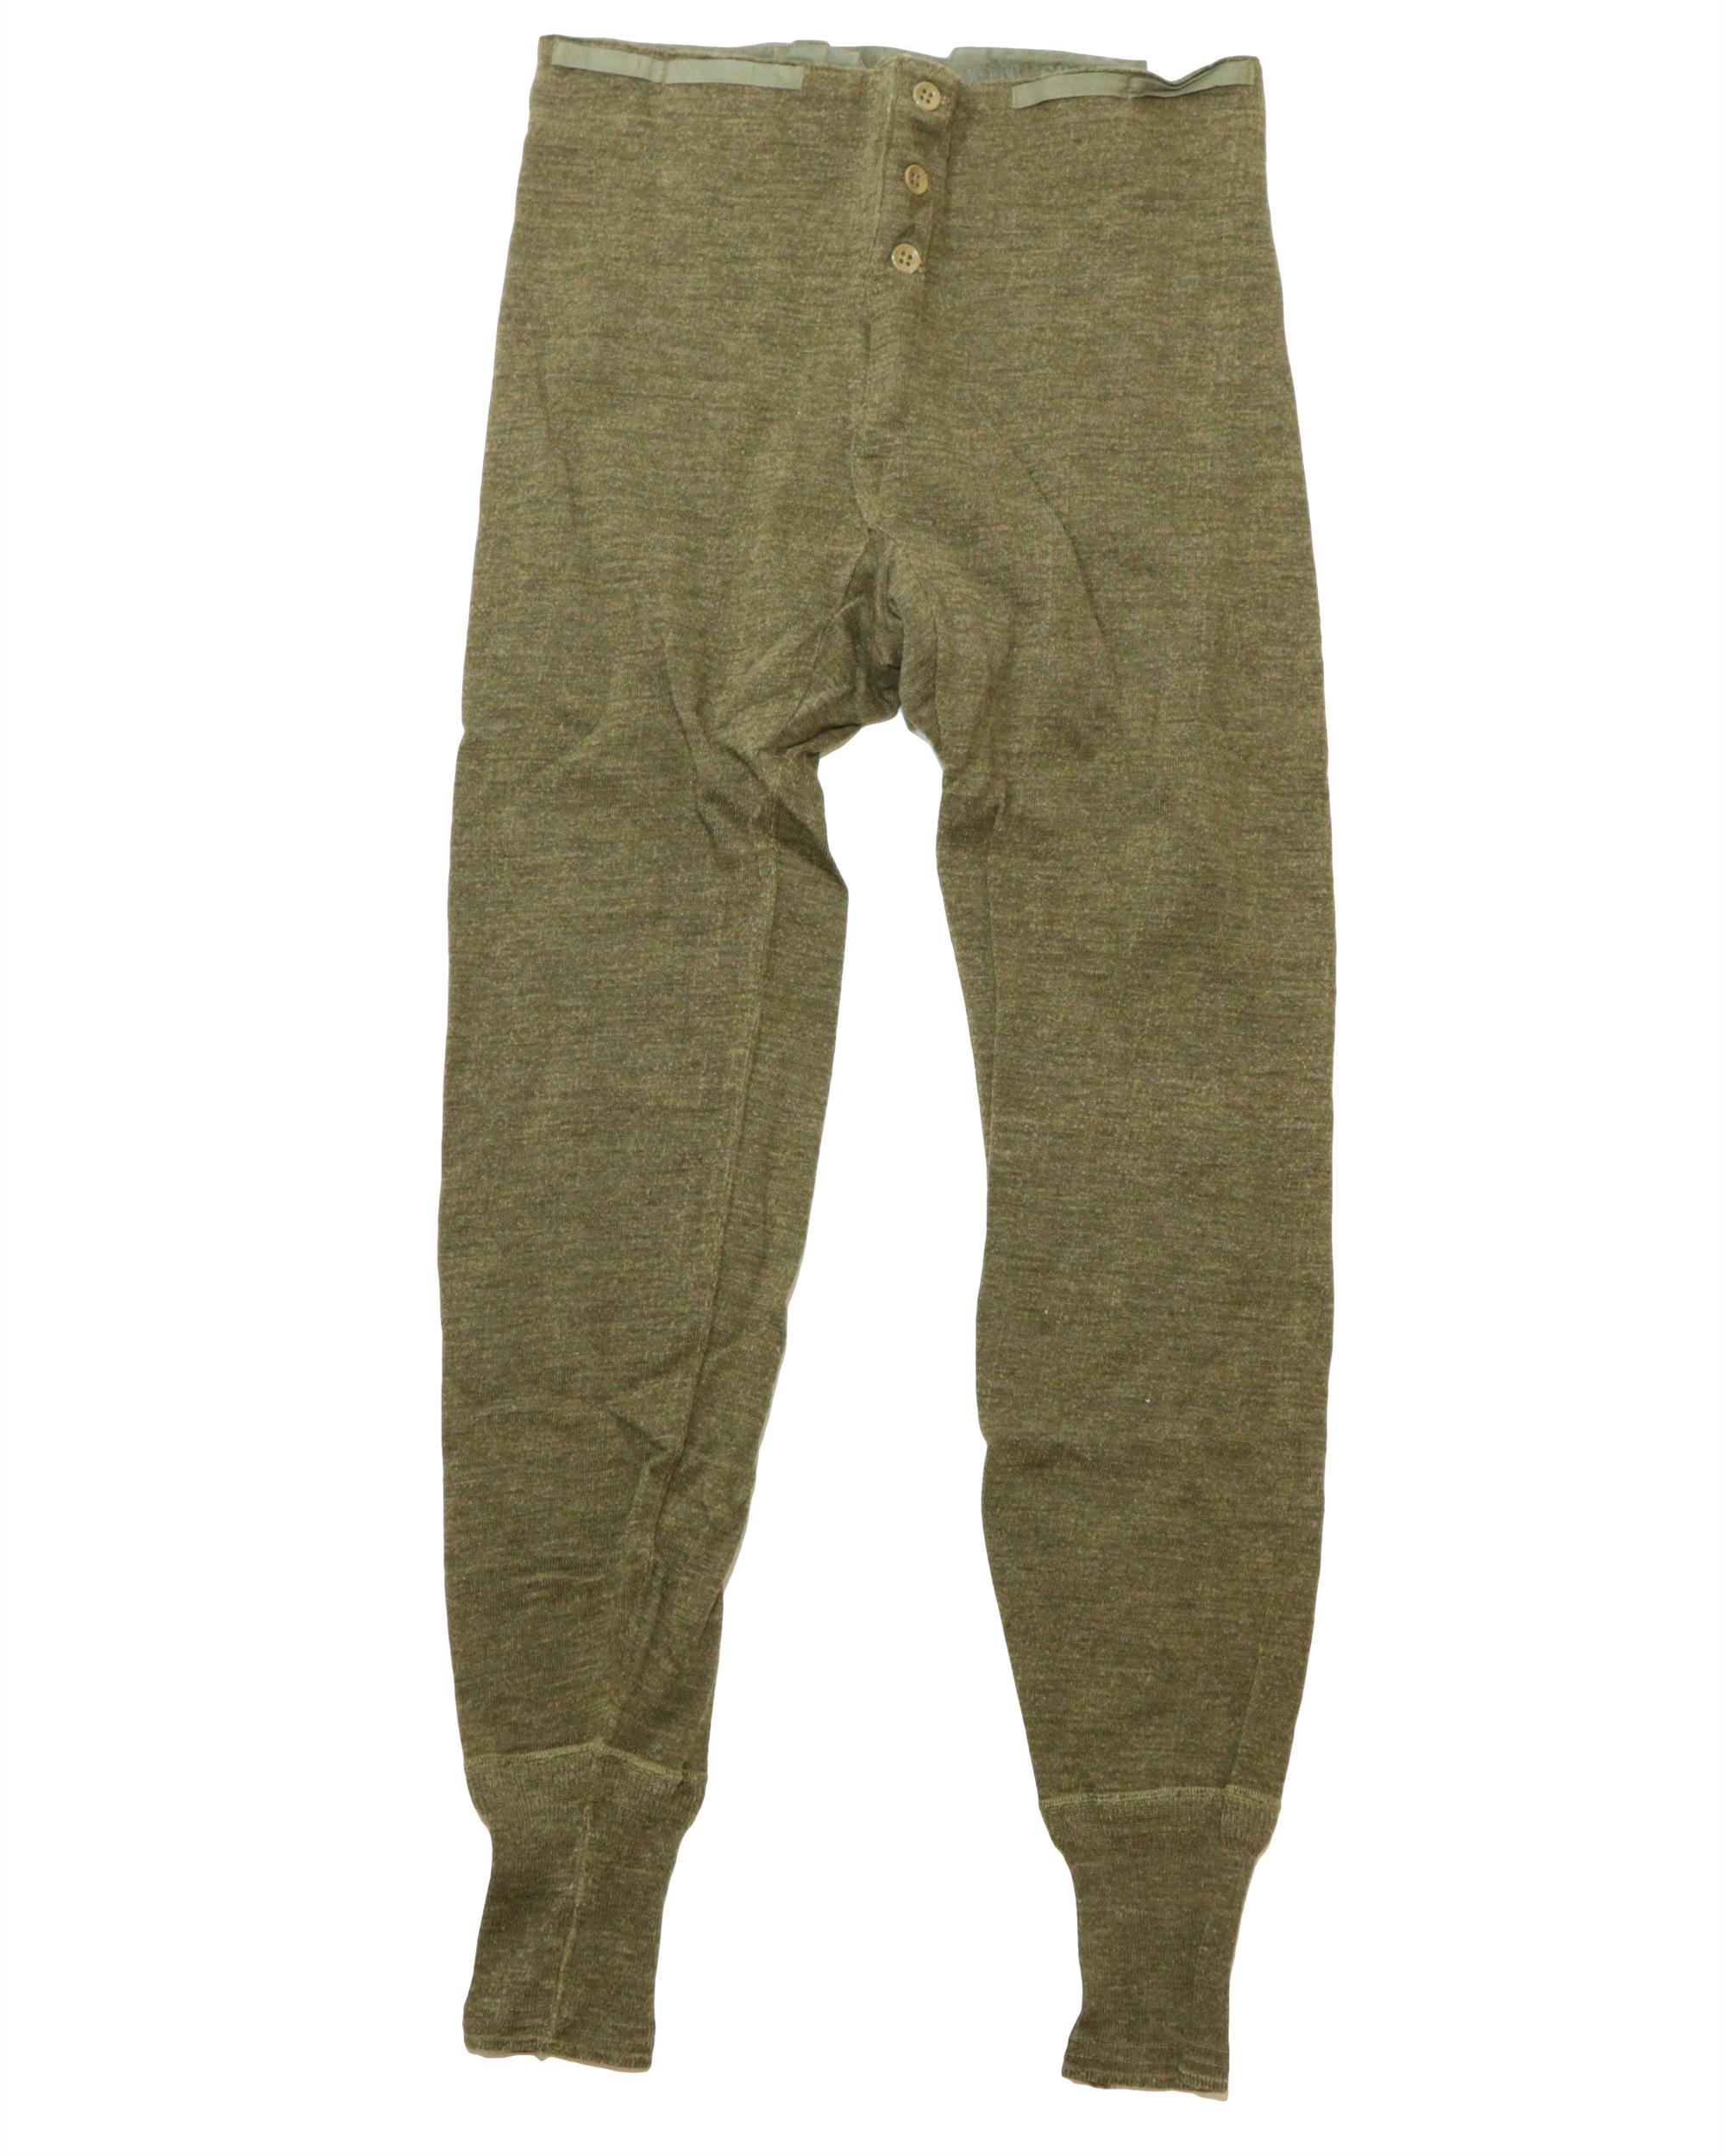 Vintage French Army Surplus Wool Long Johns Olive - Surplus & Lost